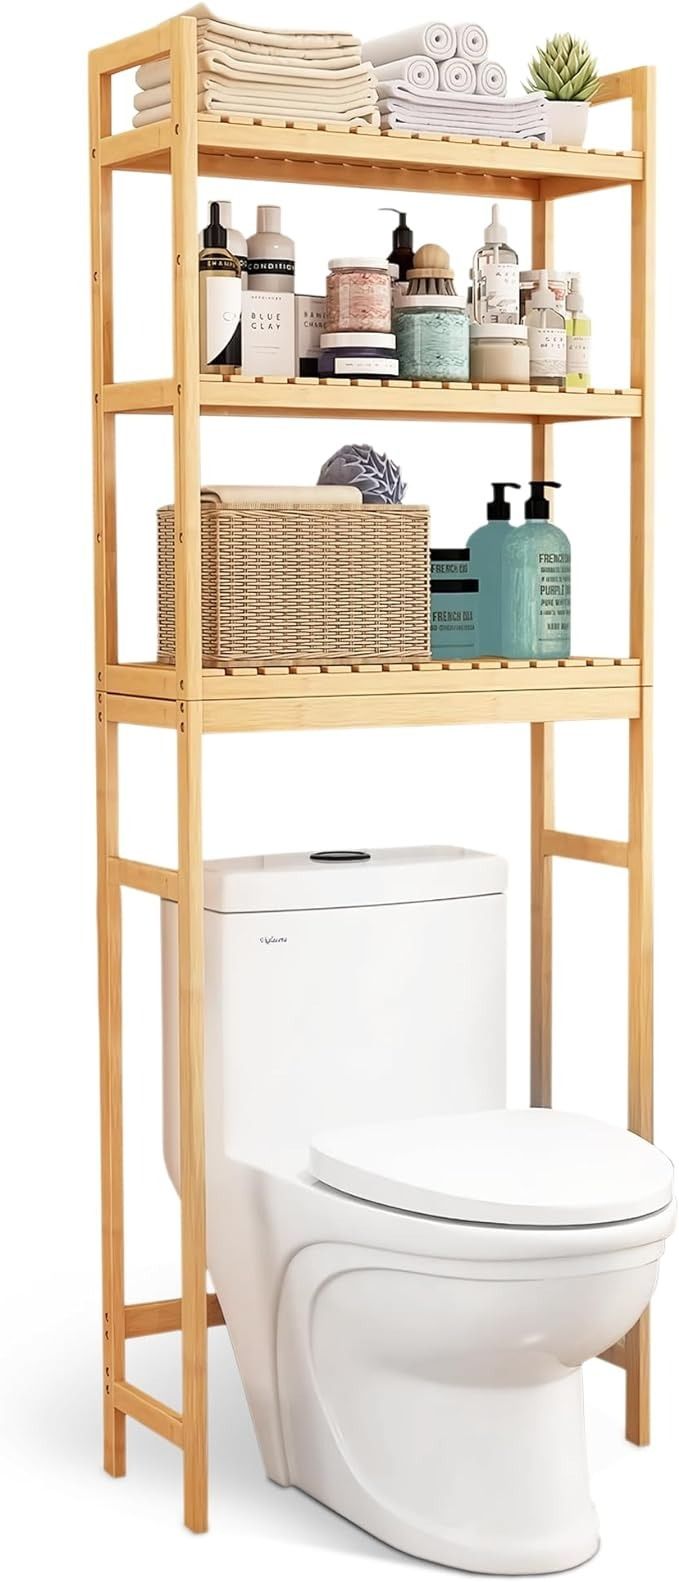 Maximize Your Bathroom Space with These Over Toilet Storage Solutions